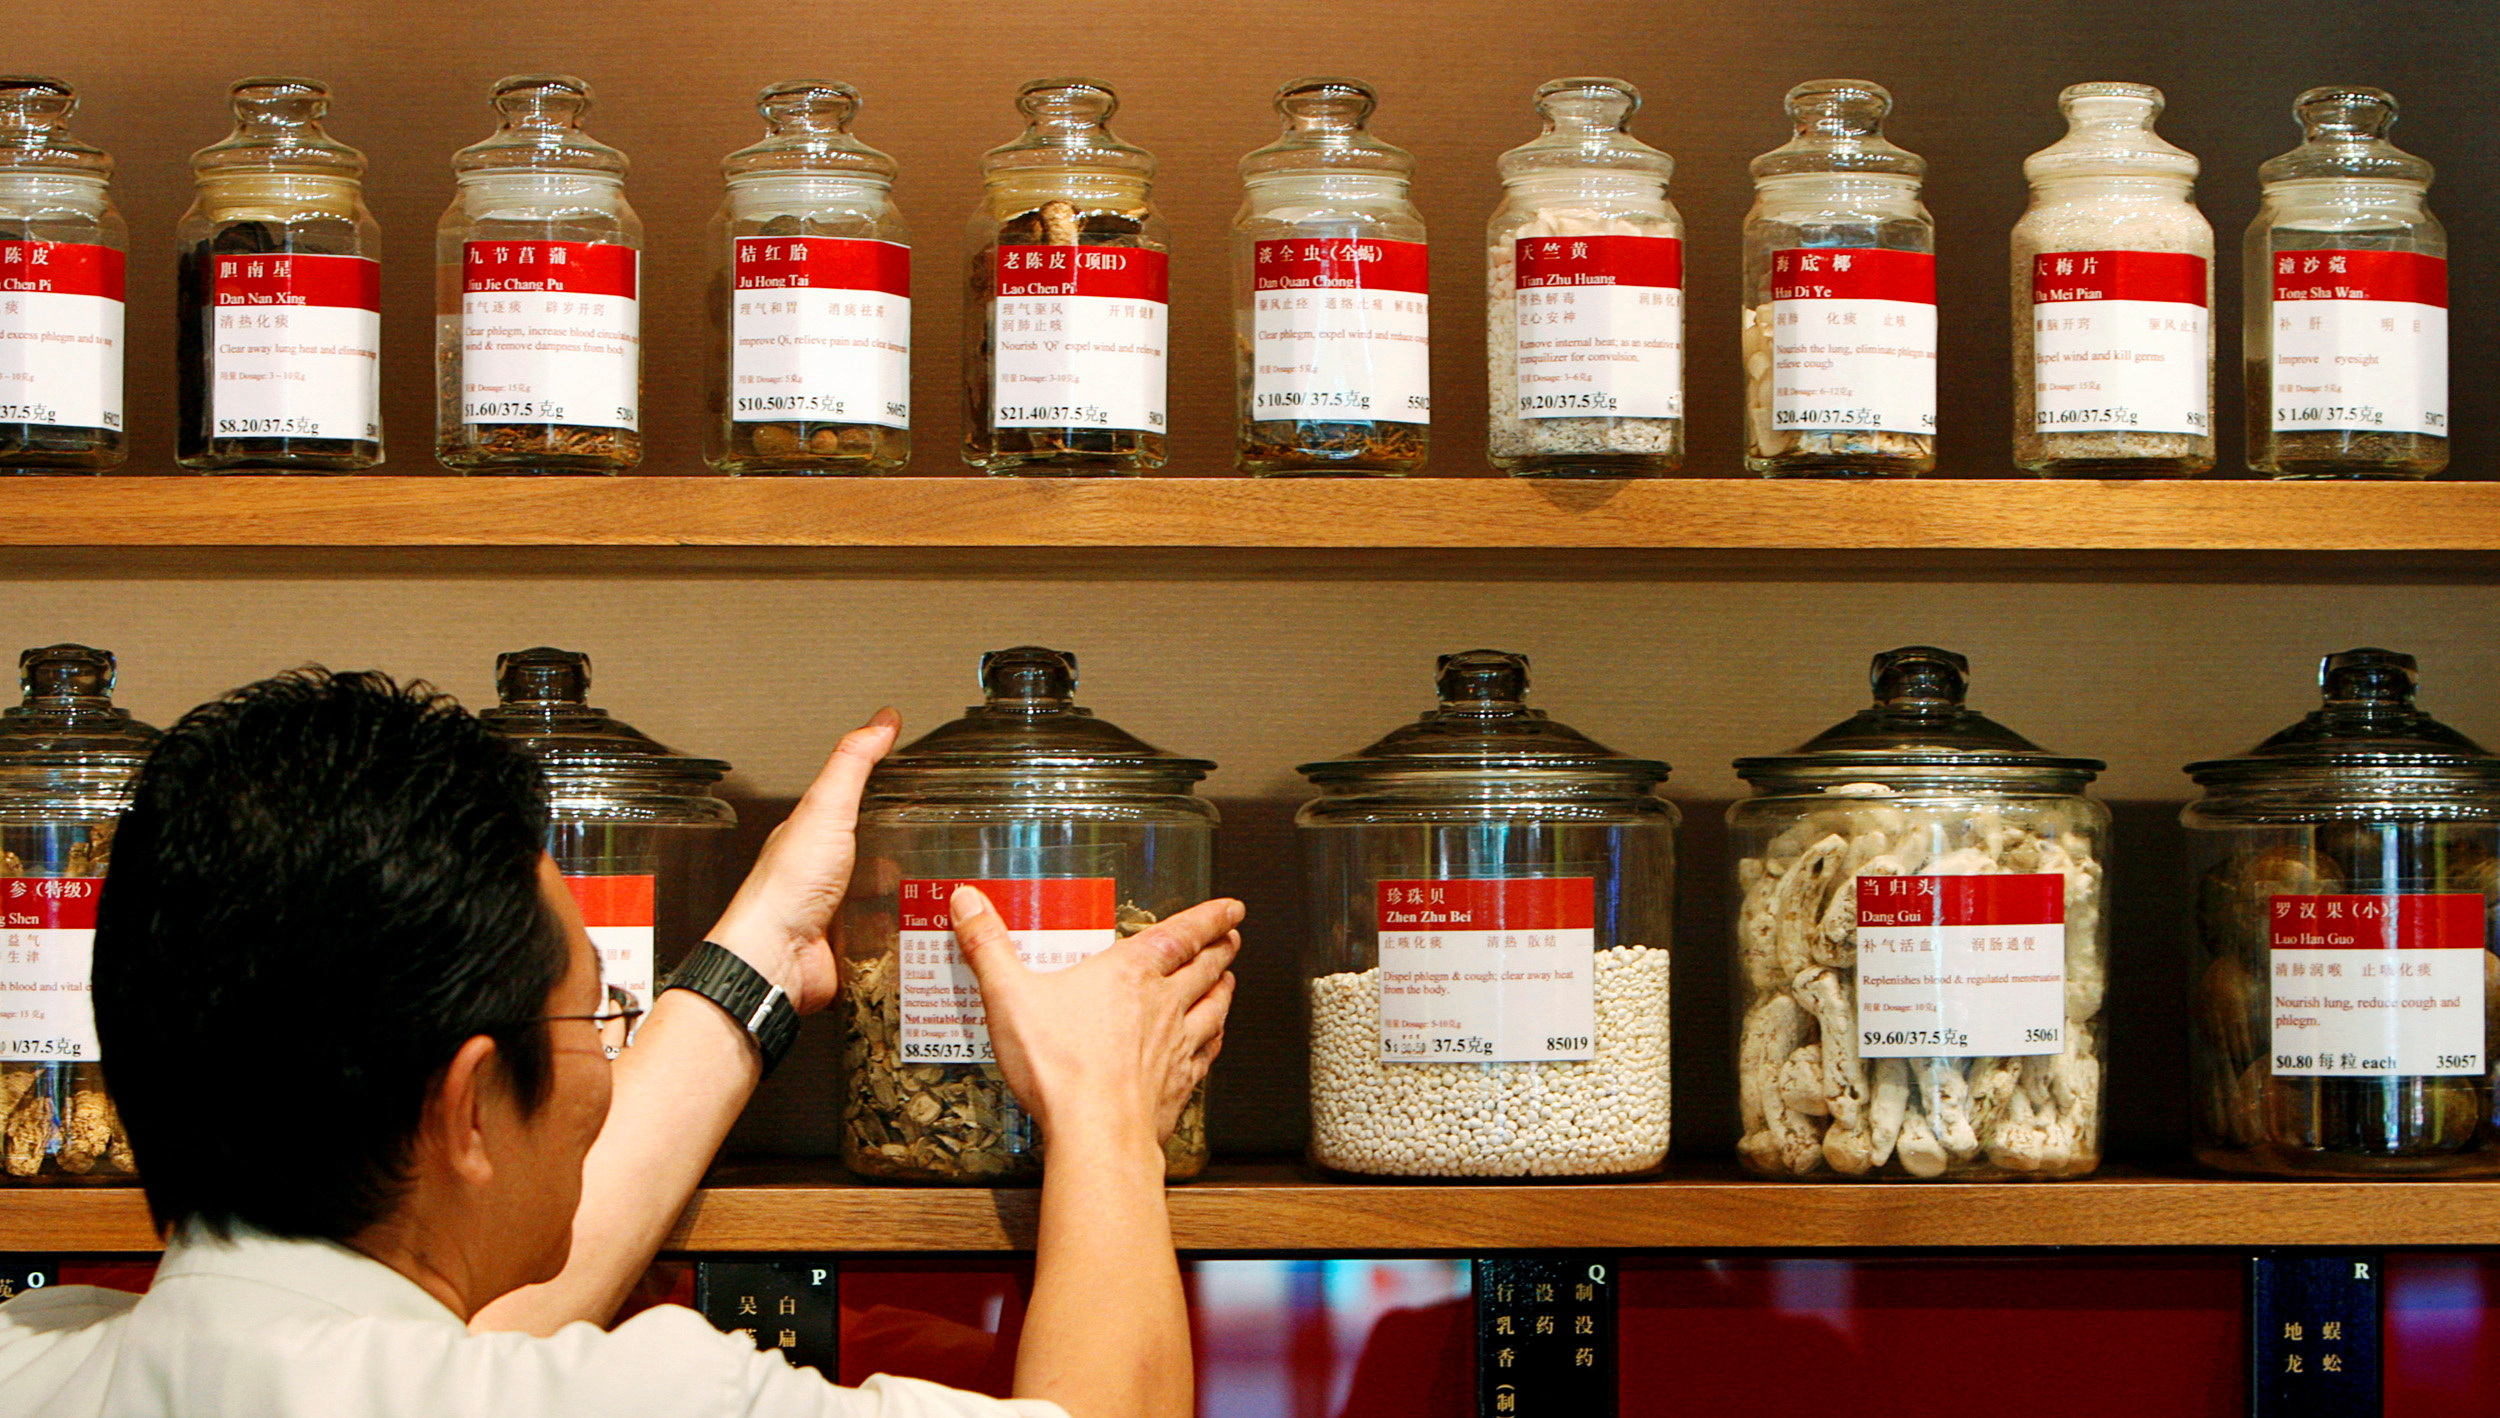 Shop assistant arranges jars containing roots and herbs at Chinese medicine shop in Singapore